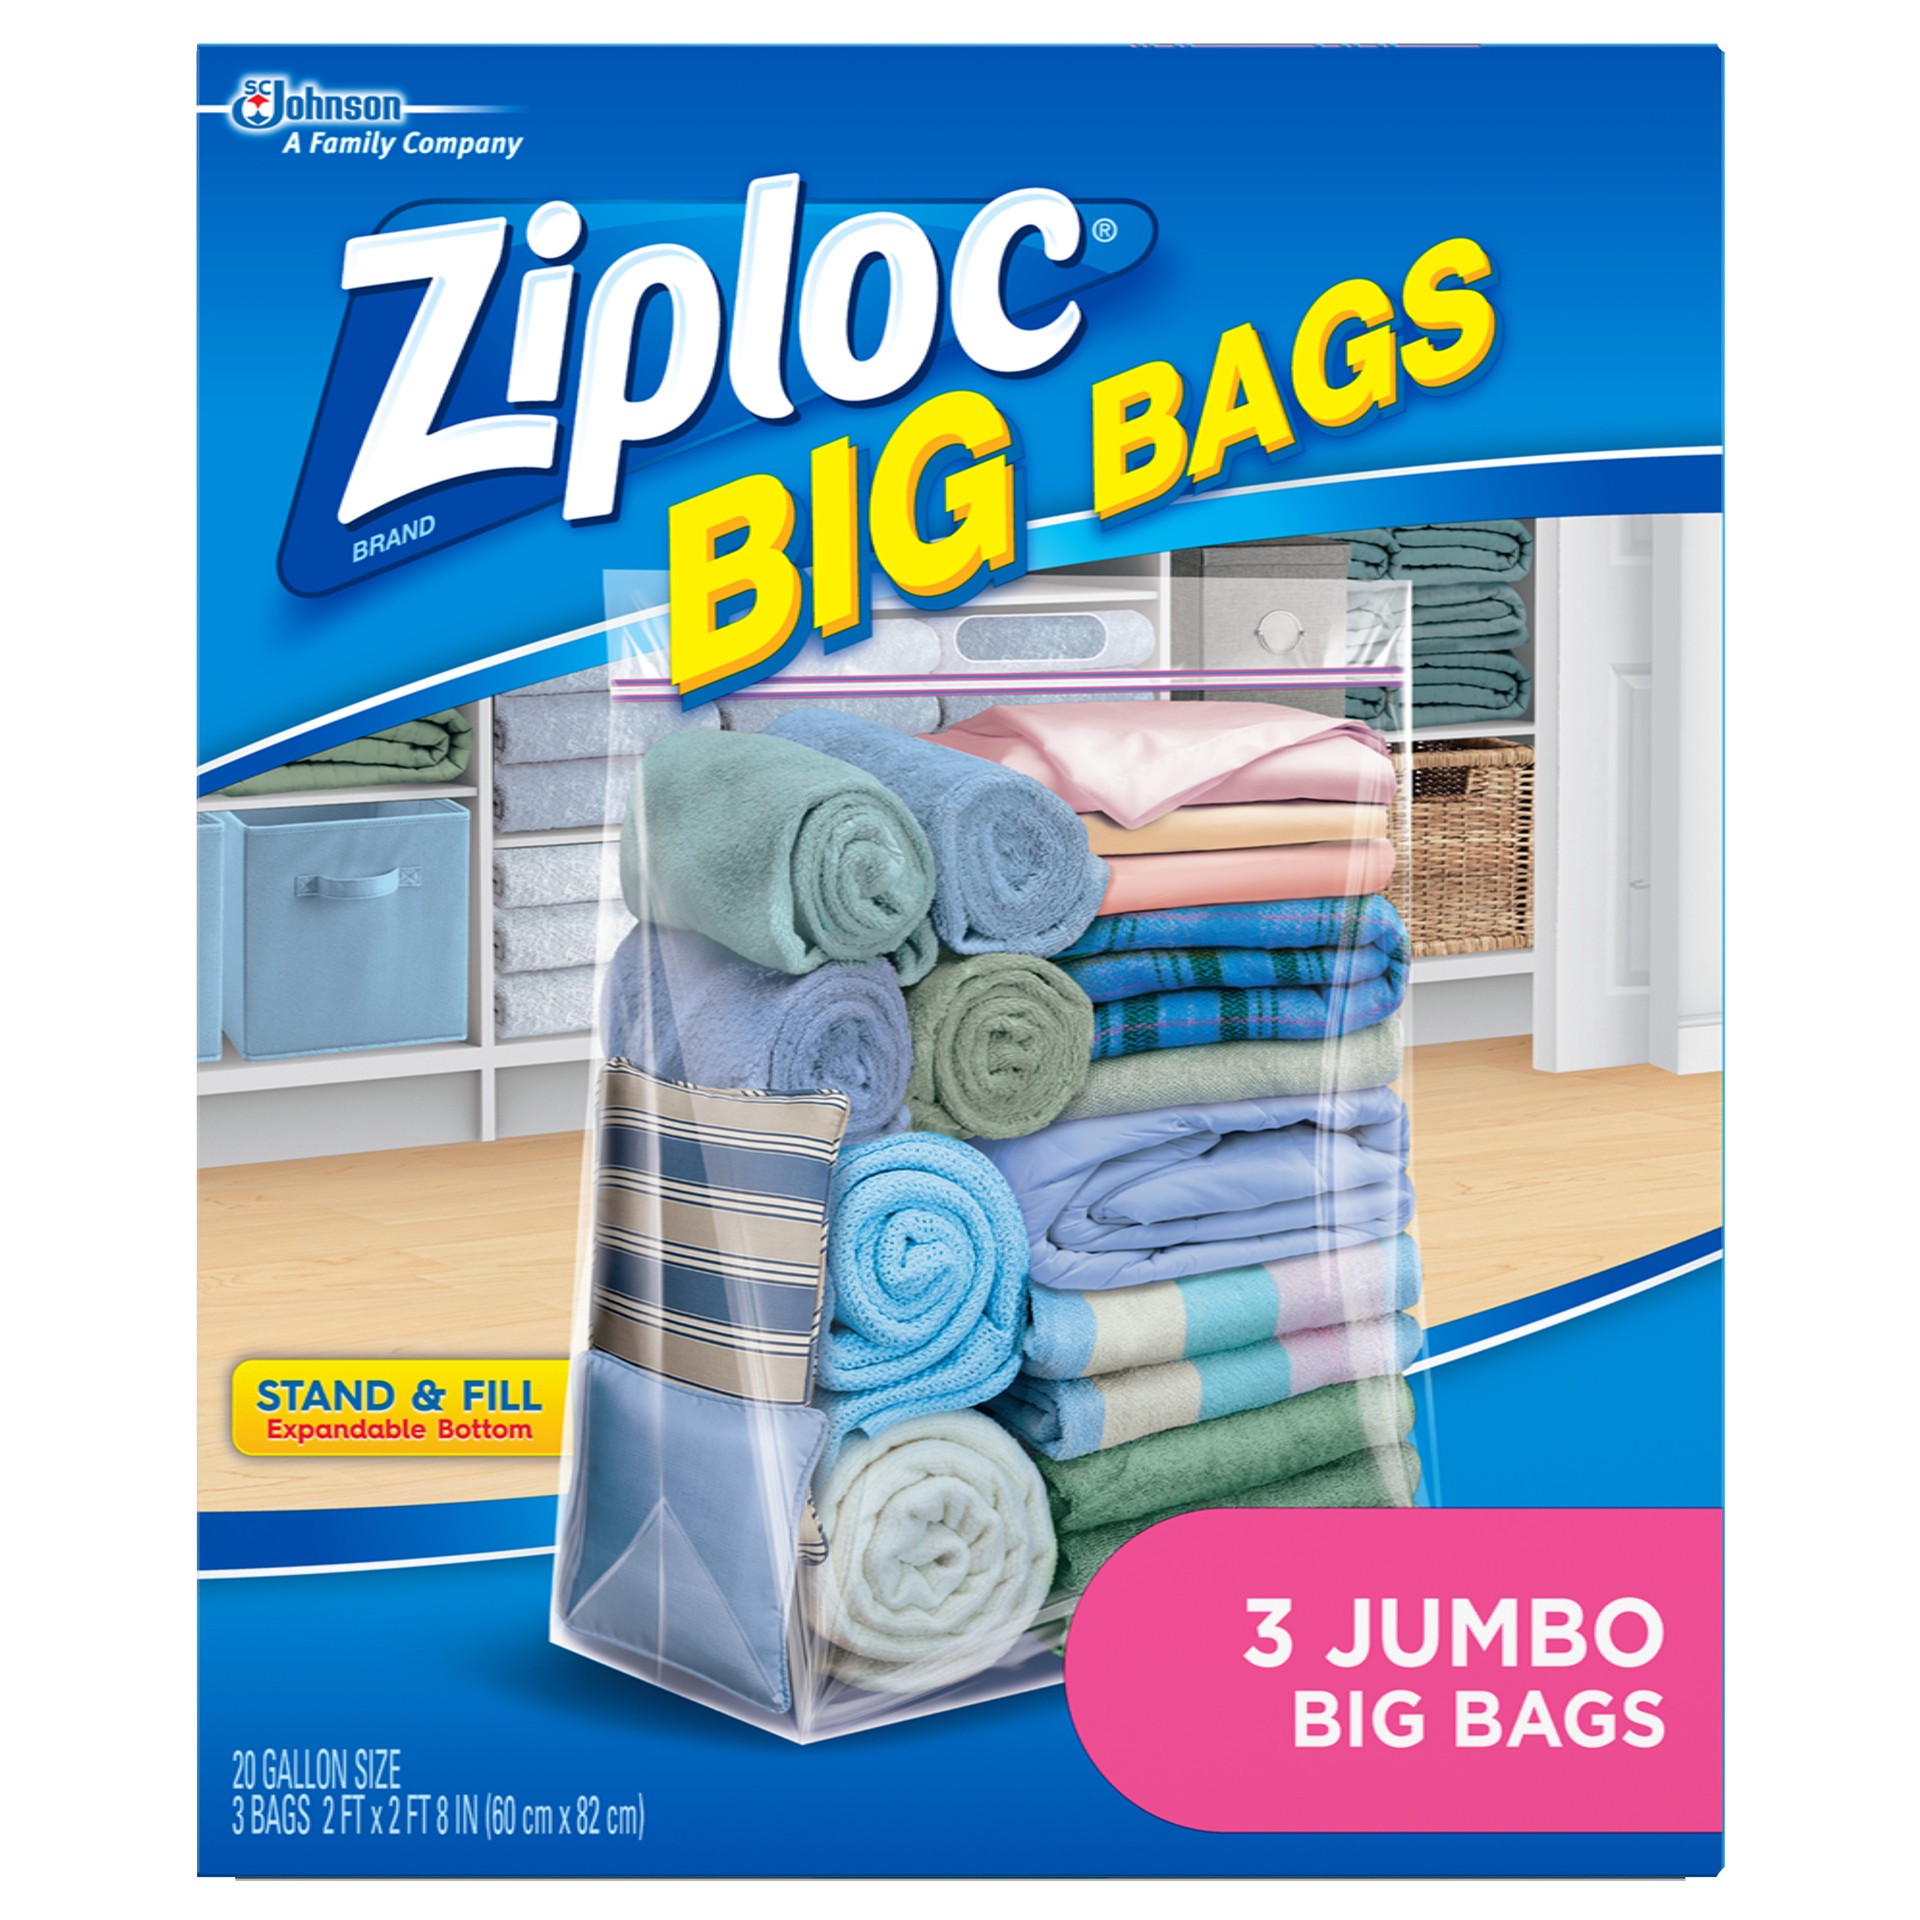 slide 1 of 5, Ziploc Big Bags, Jumbo, Secure Double Zipper, 3 CT, Expandable Bottom, Heavy-Duty Plastic, Built-In Handles, Flexible Shape to Fit Where Storage Boxes Can't, 3 ct